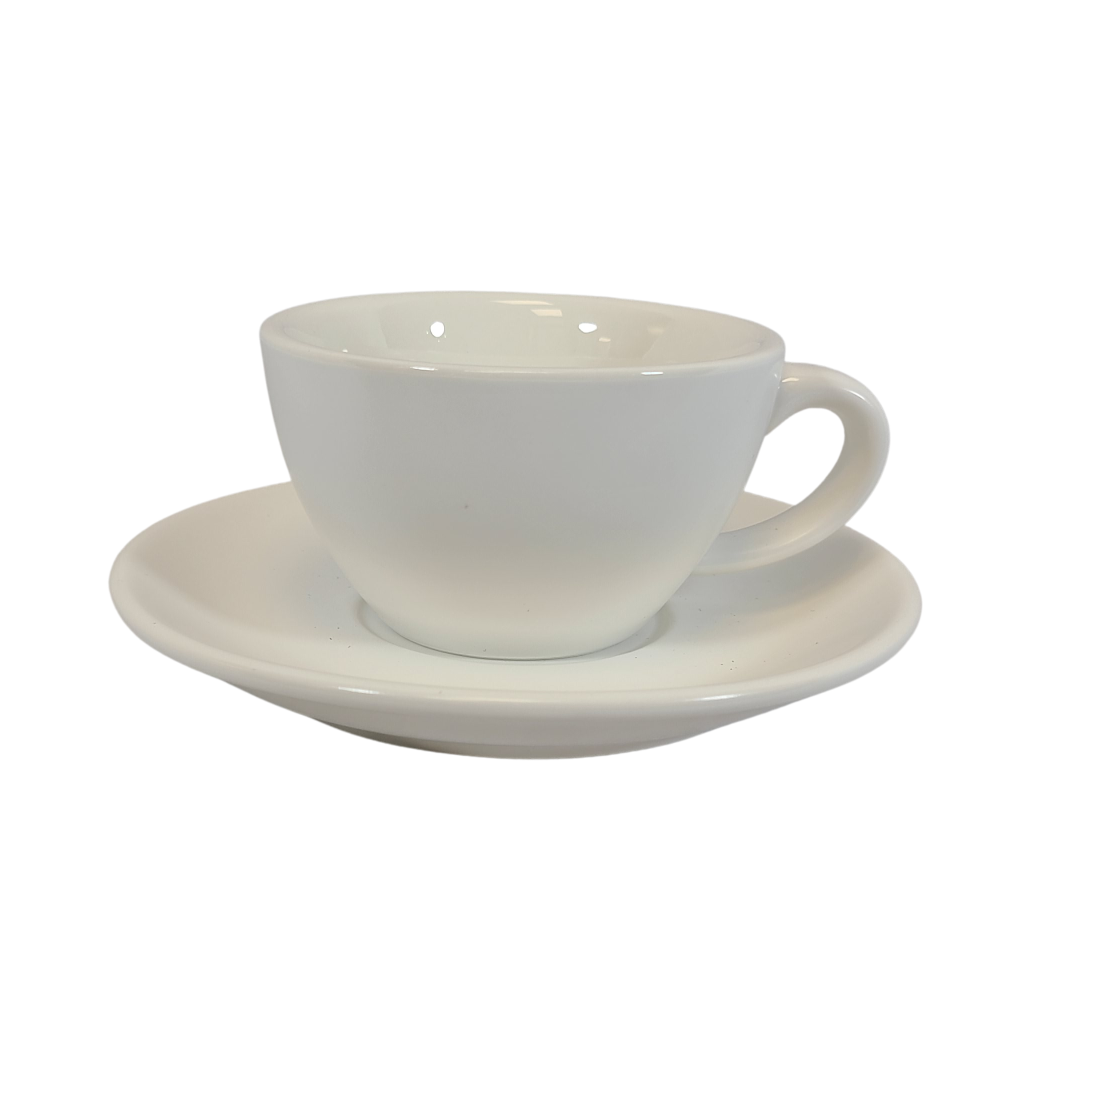 Coffee Addicts commercial ceramic cup with saucer in matte white cappuccino cortado cup 5oz 150ml